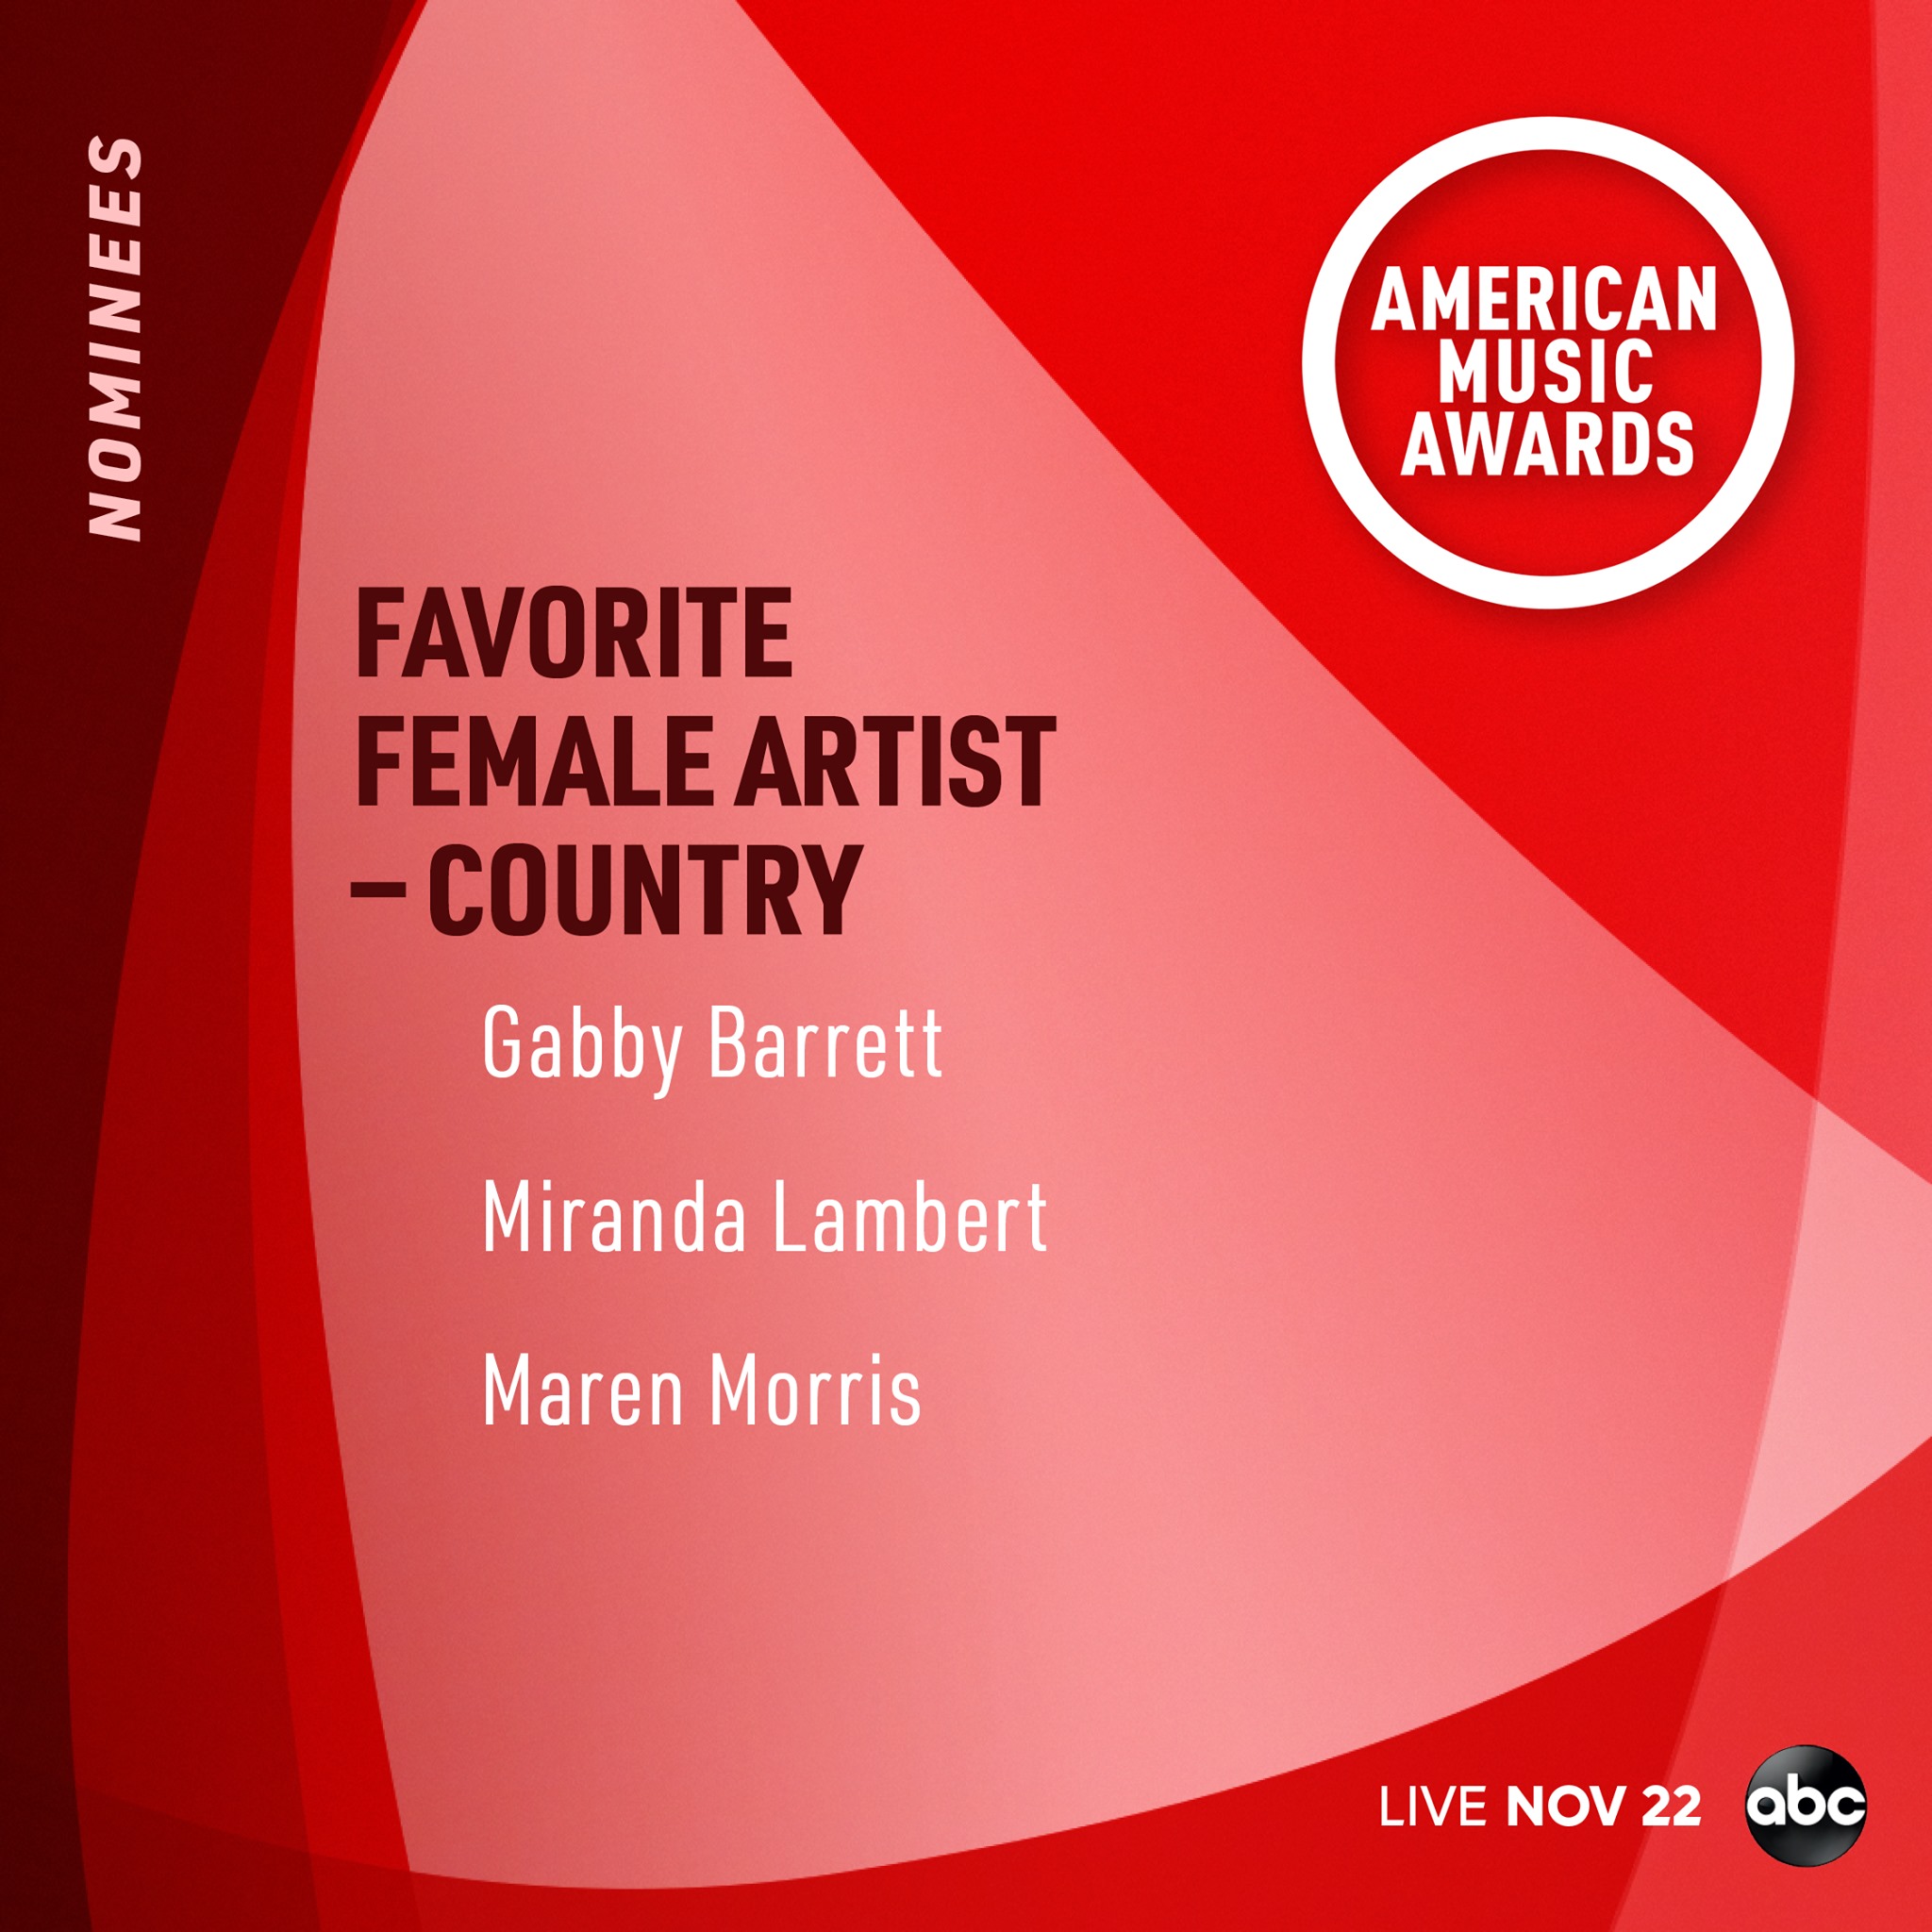 Congratulations to Gabby Barrett for being nominated for Favorite Female Artist – Country at the 2020 American Music Awards!
